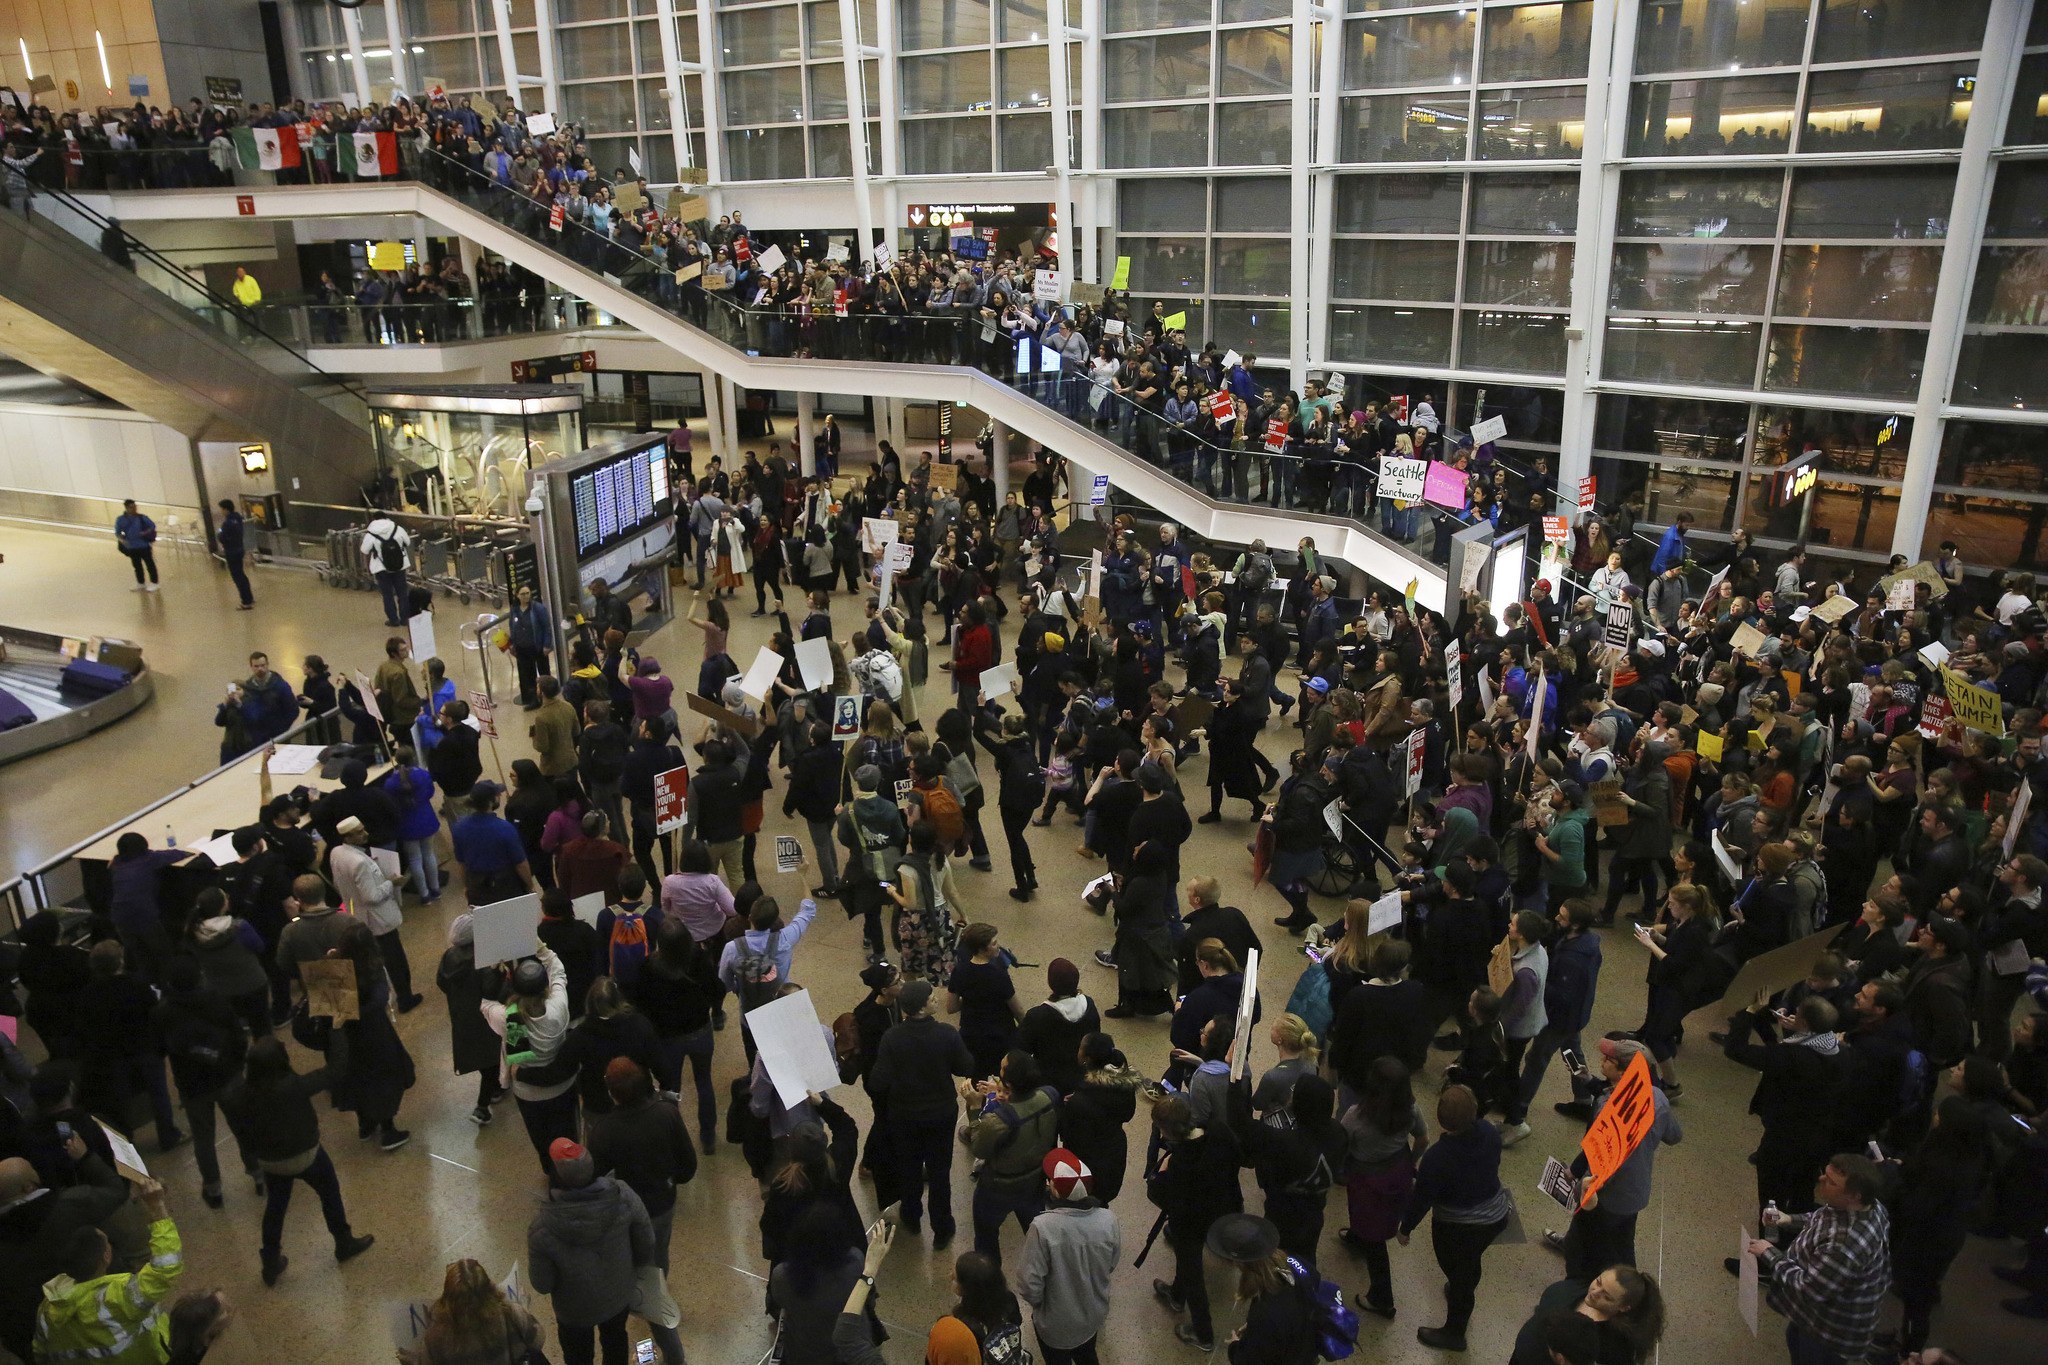 More than 1,000 people gather Saturday at Seattle-Tacoma International Airport to protest President Donald Trump’s order that restricts immigration to the U.S. (Genna Martin/seattlepi.com via AP)